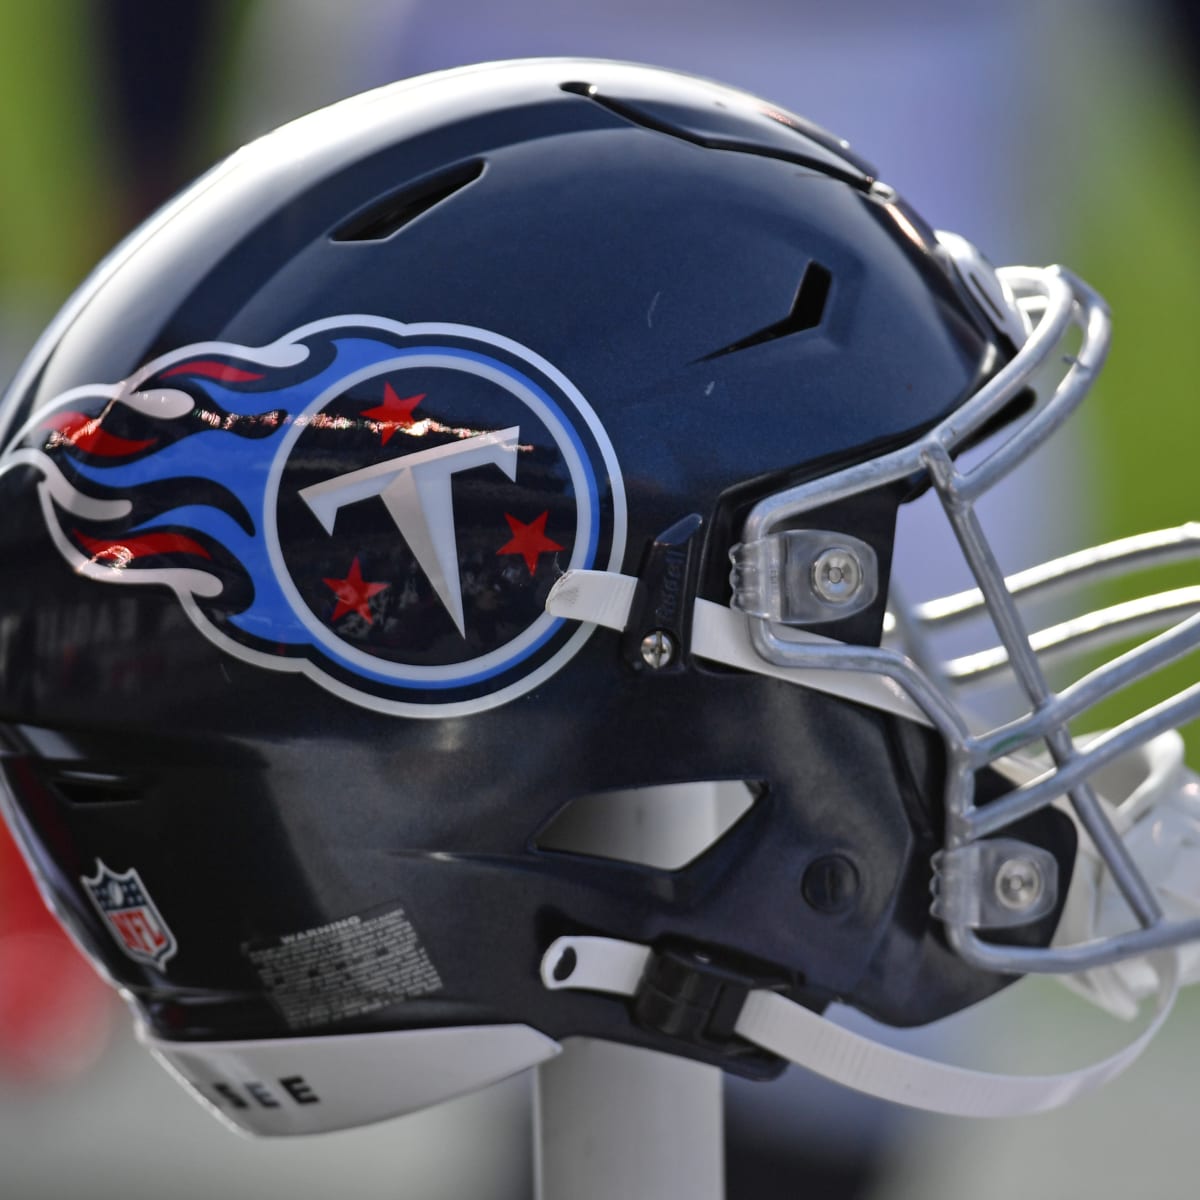 tennessee titans new uniforms 2021